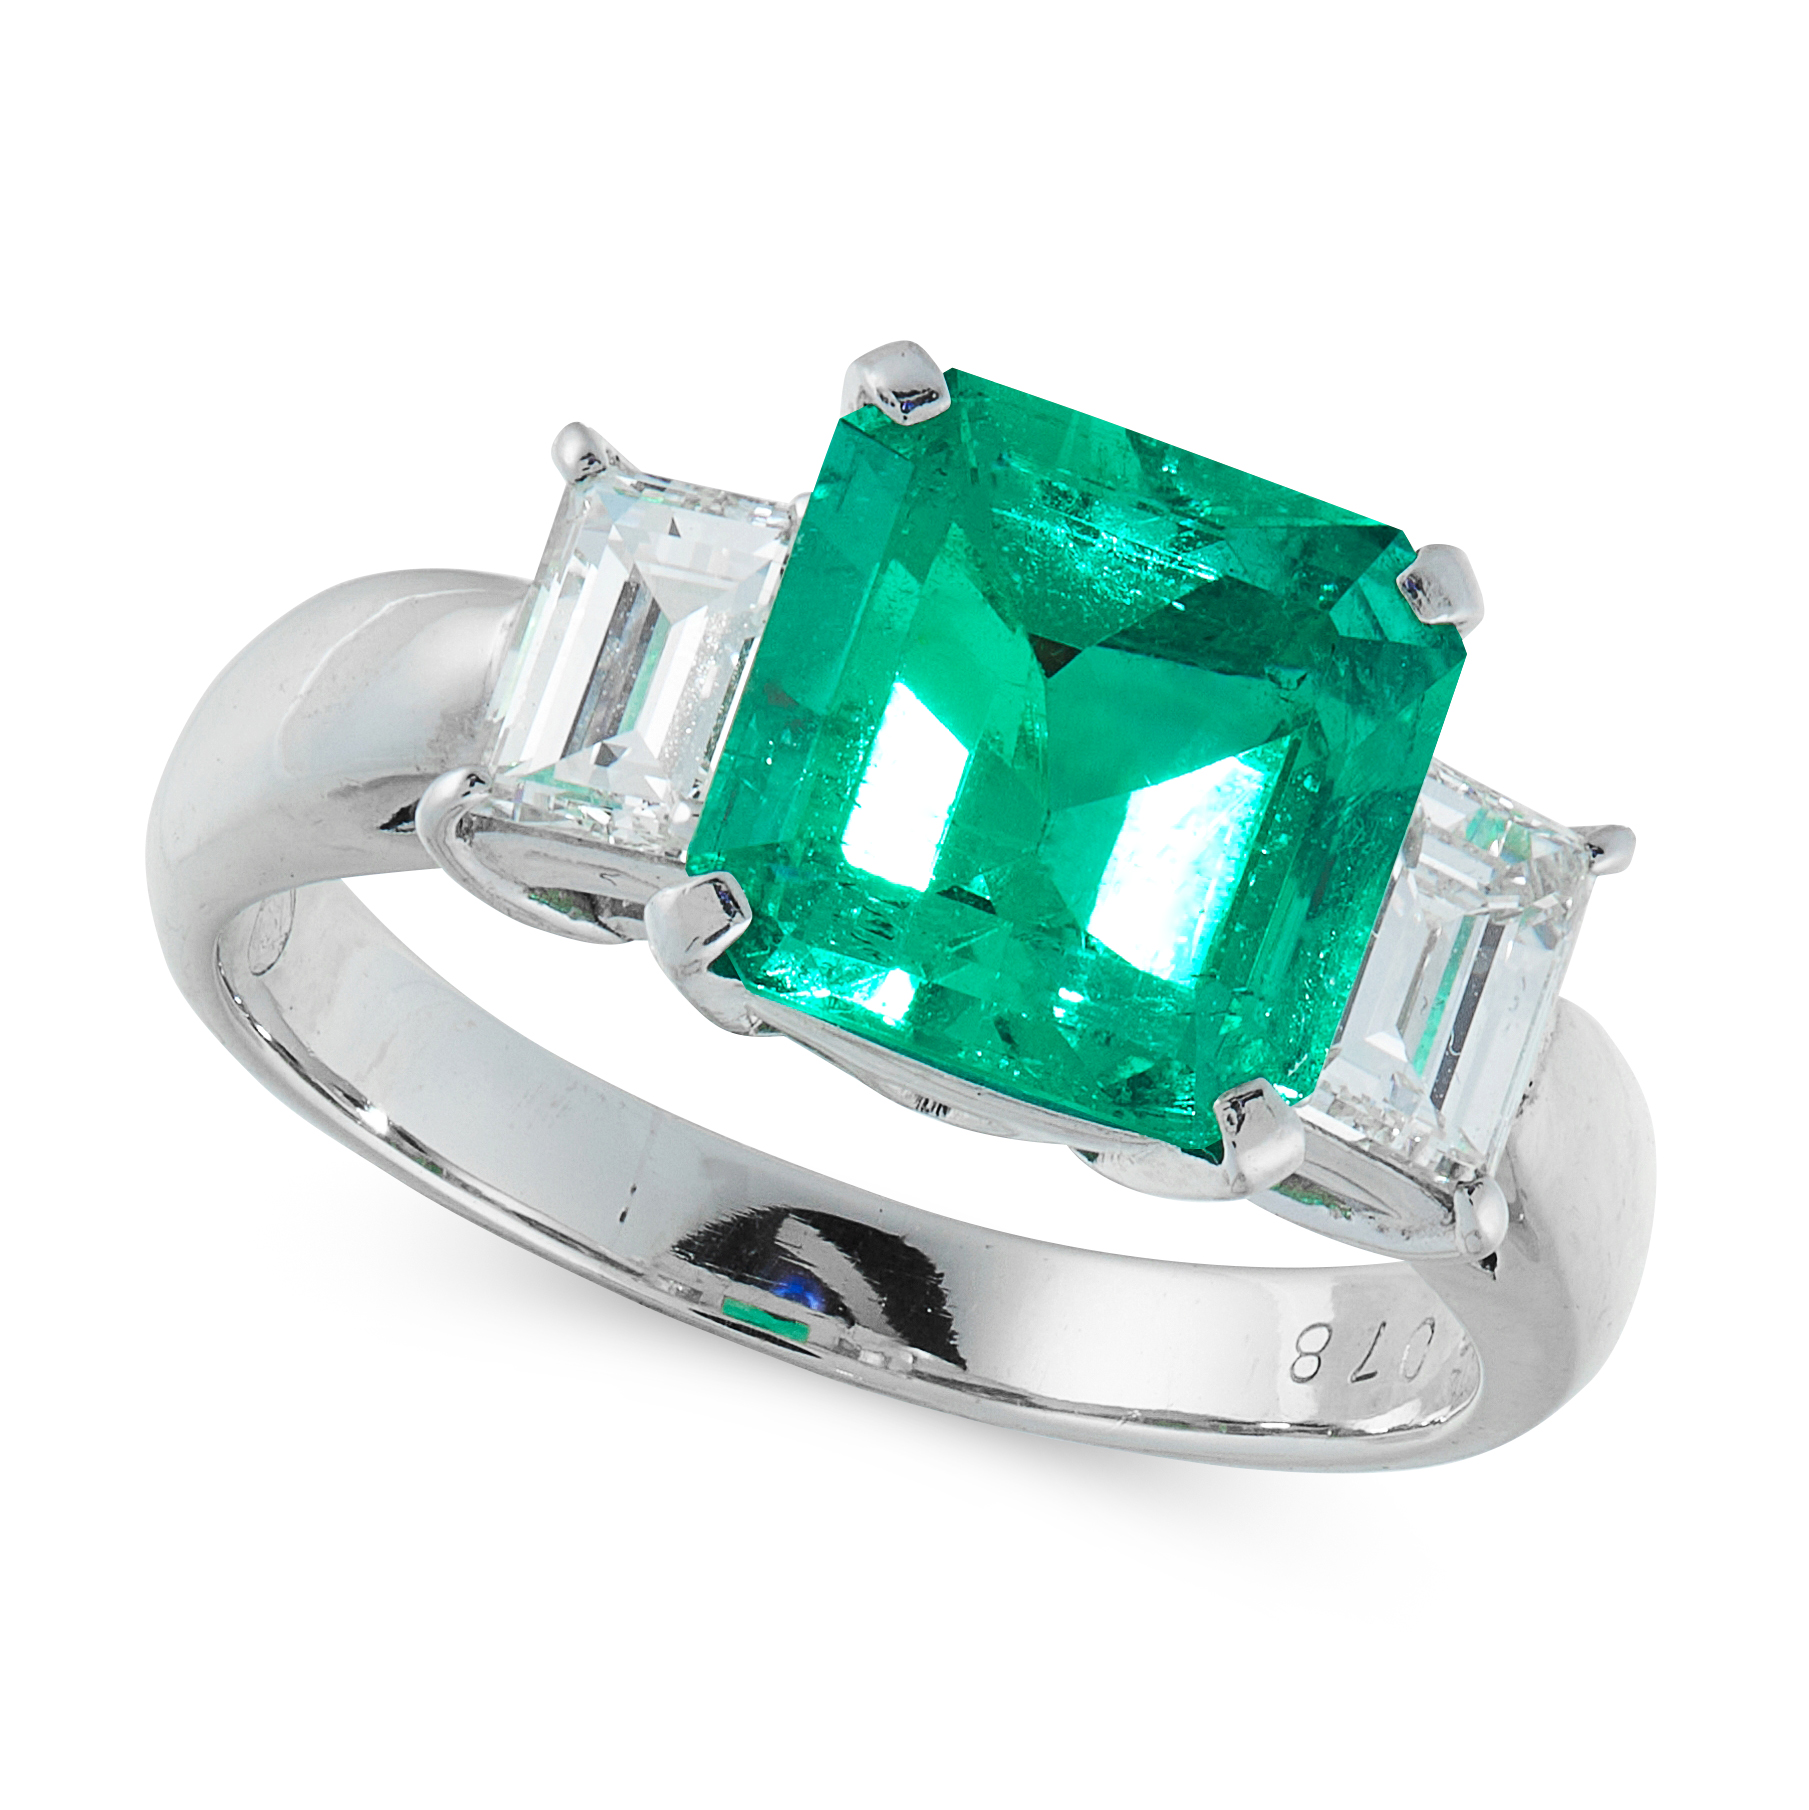 A COLOMBIAN EMERALD AND DIAMOND DRESS RING in platinum, set with an emerald cut emerald of 2.33